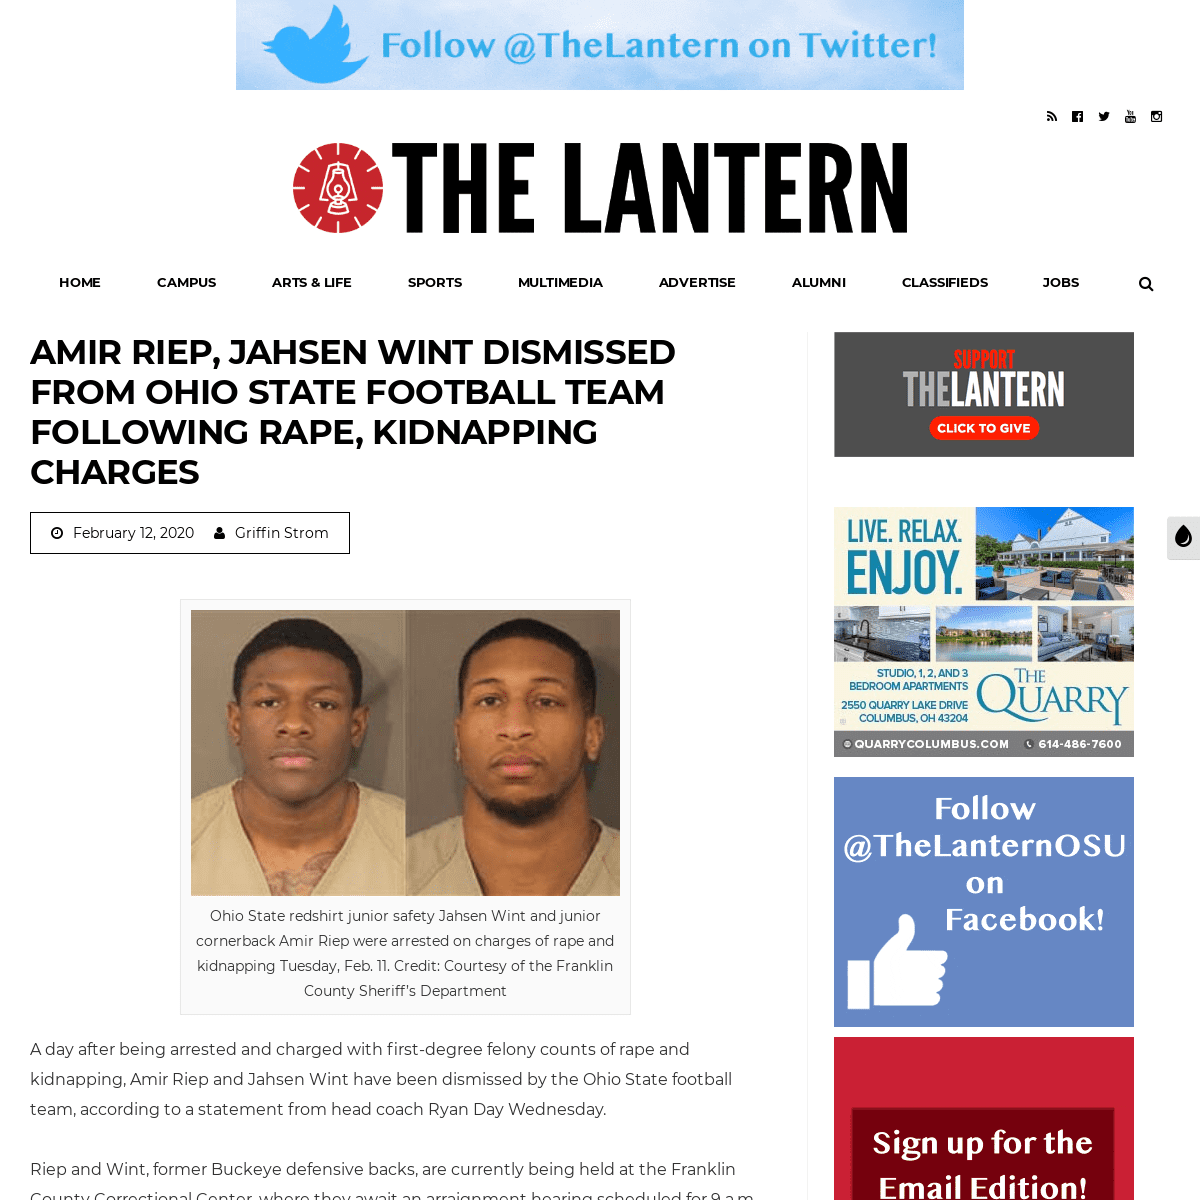 A complete backup of www.thelantern.com/2020/02/ohio-state-football-amir-riep-jahsen-wint-dismissed-from-ohio-state-football-tea